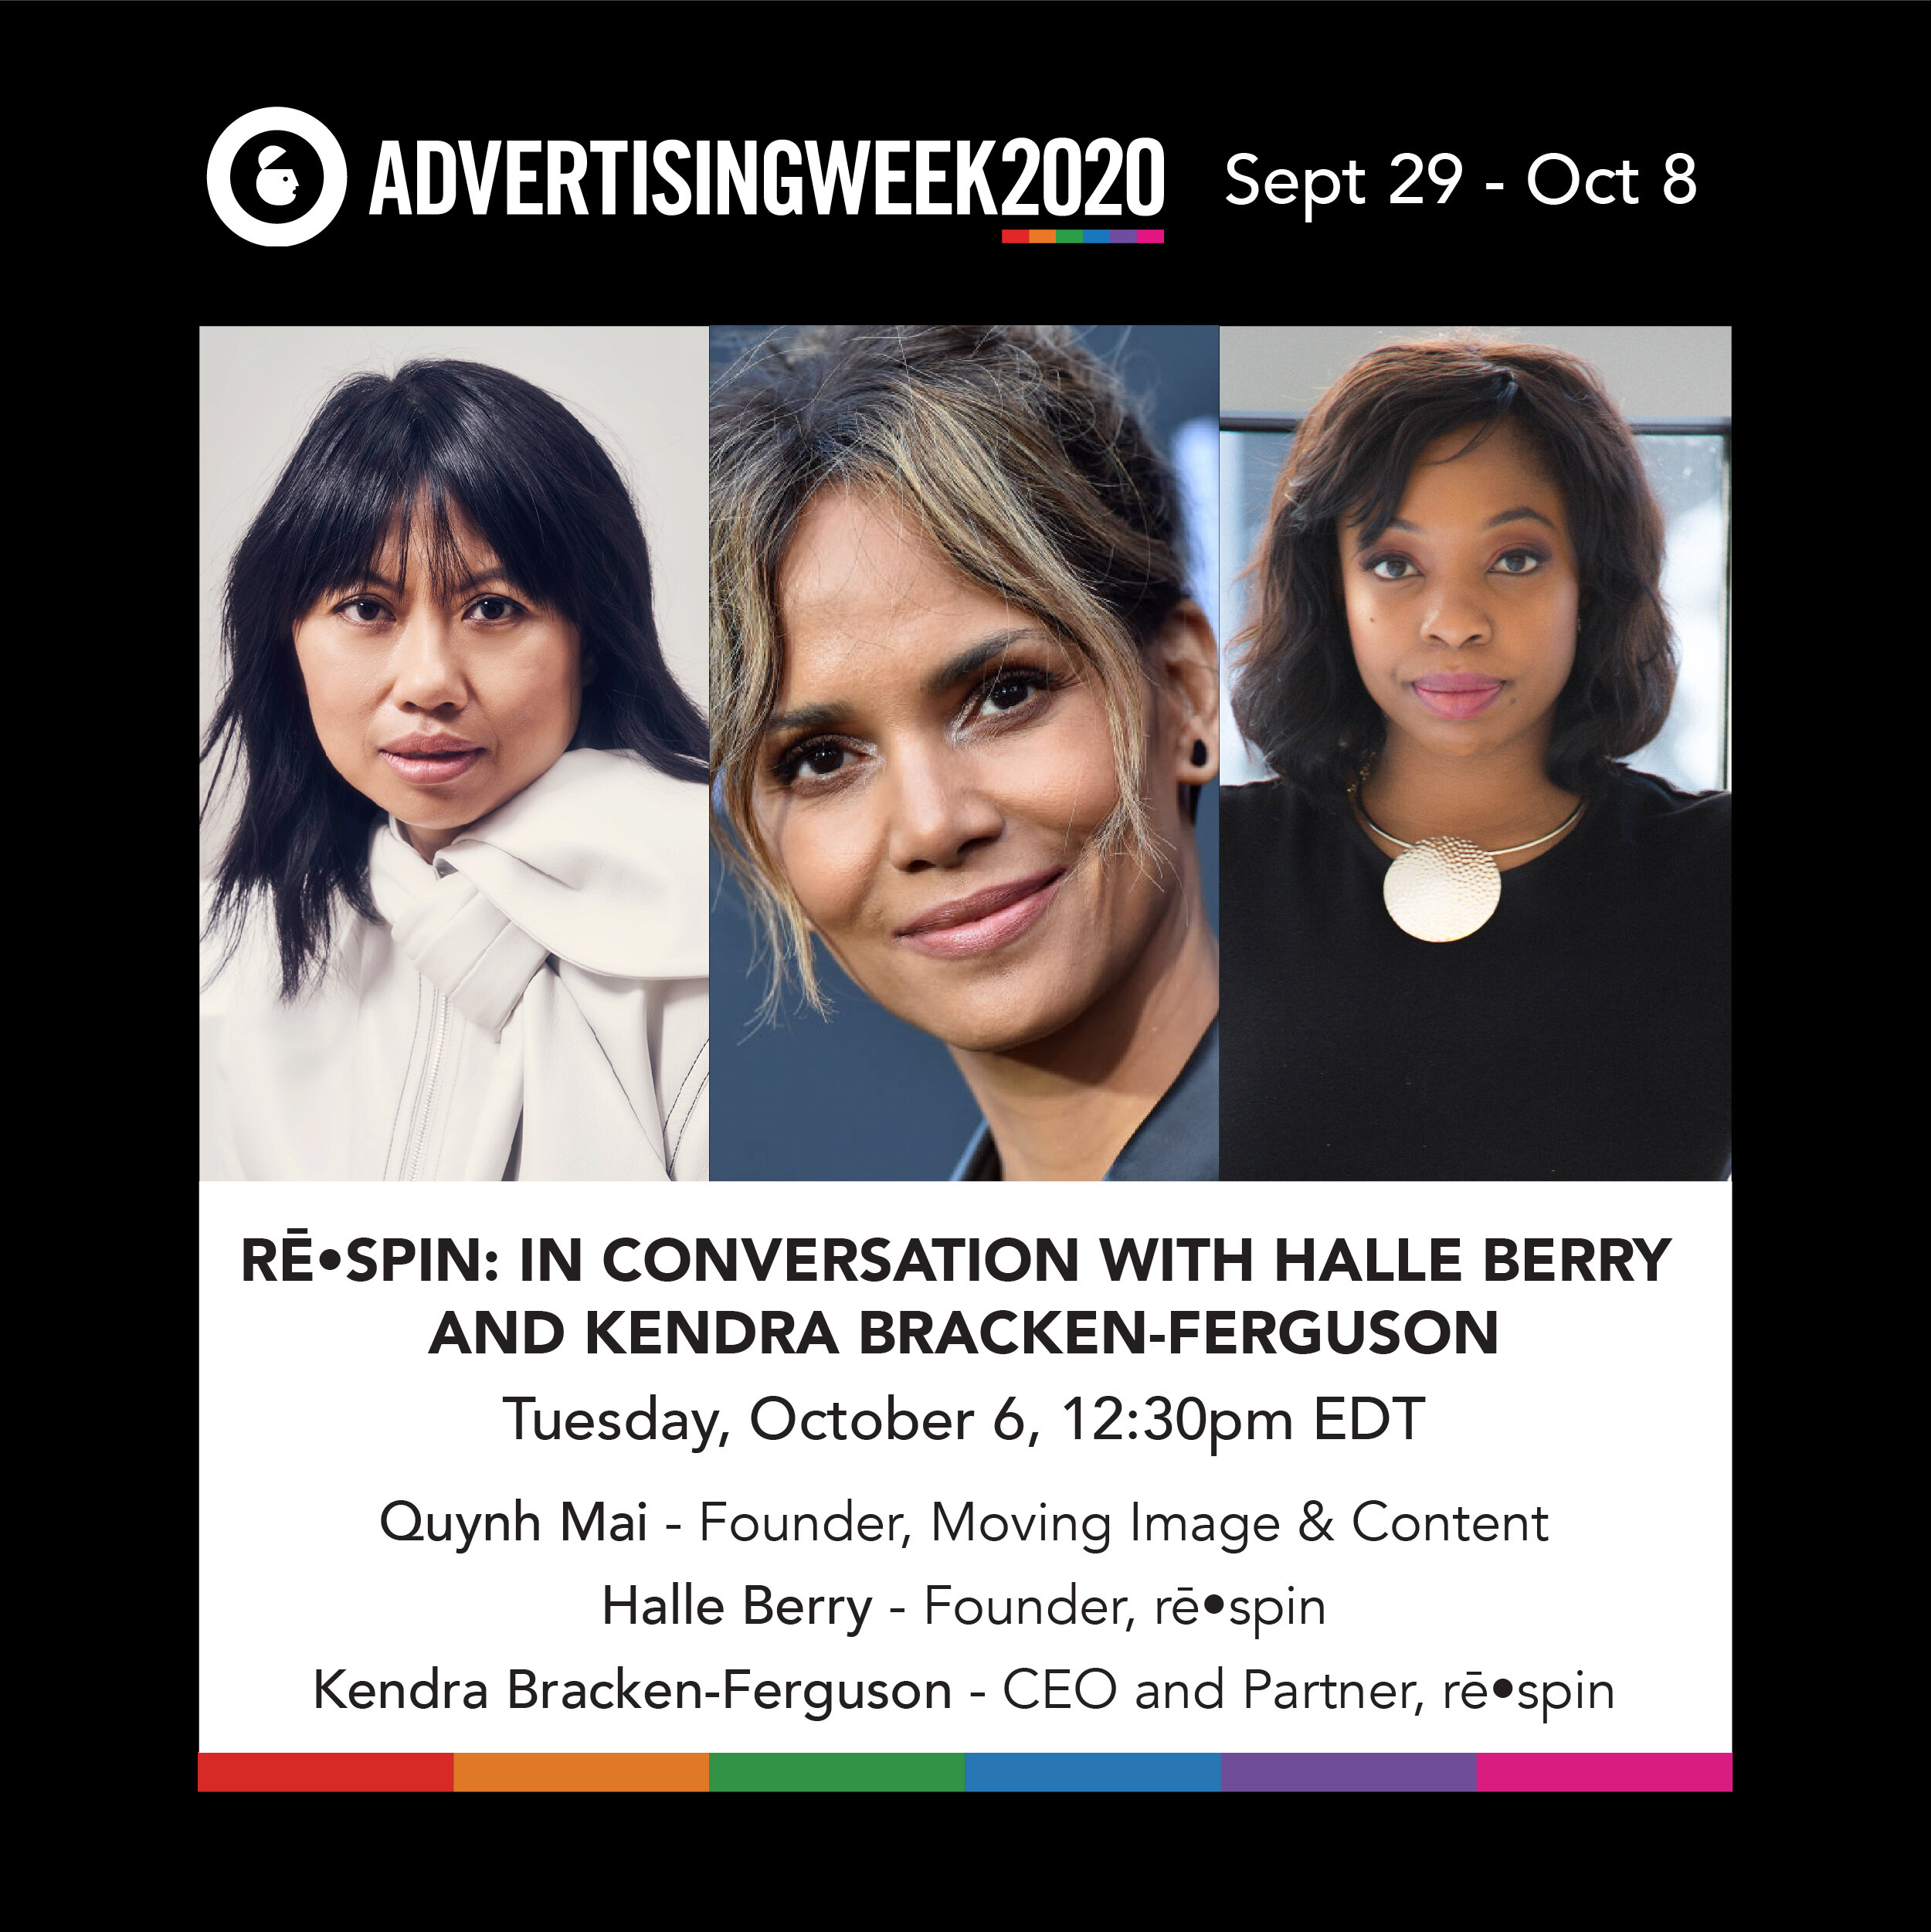 In Conversation with Halle Berry and Kendra Bracken-Ferguson